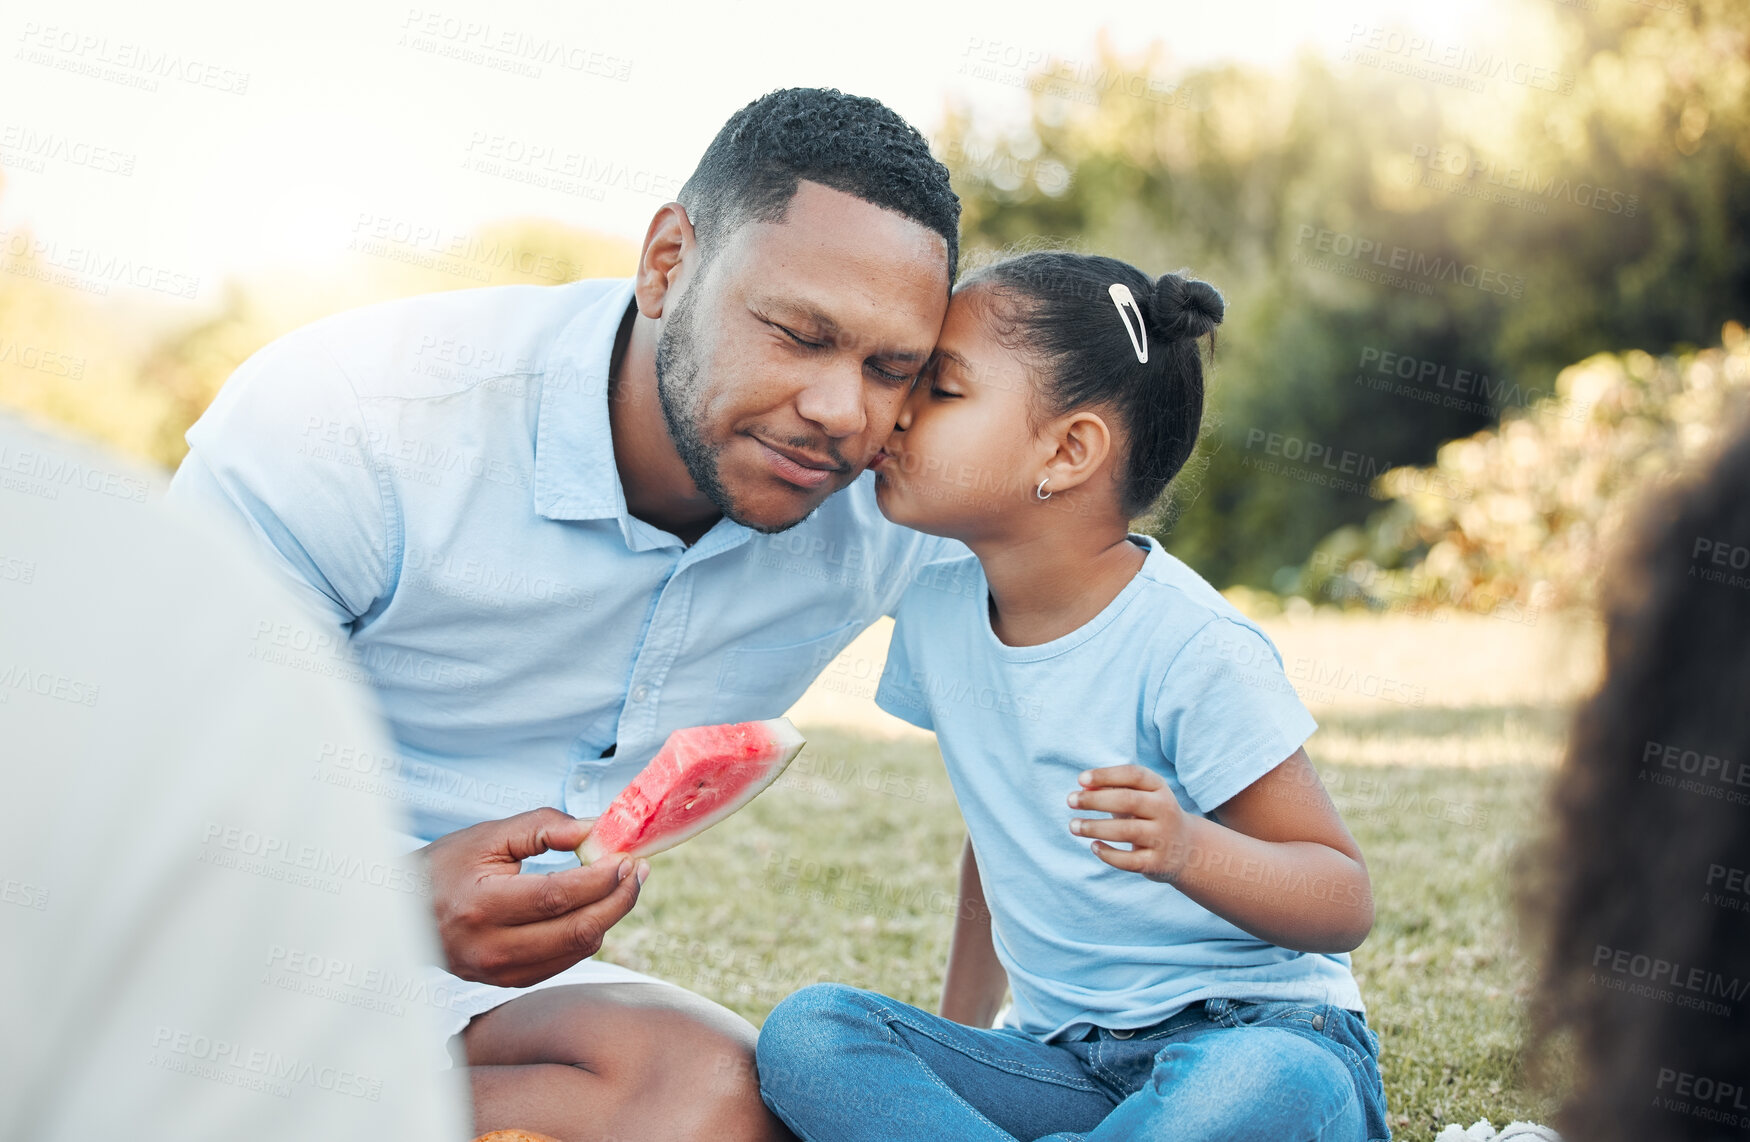 Buy stock photo Shot of a daughter kissing her dad at a picnic